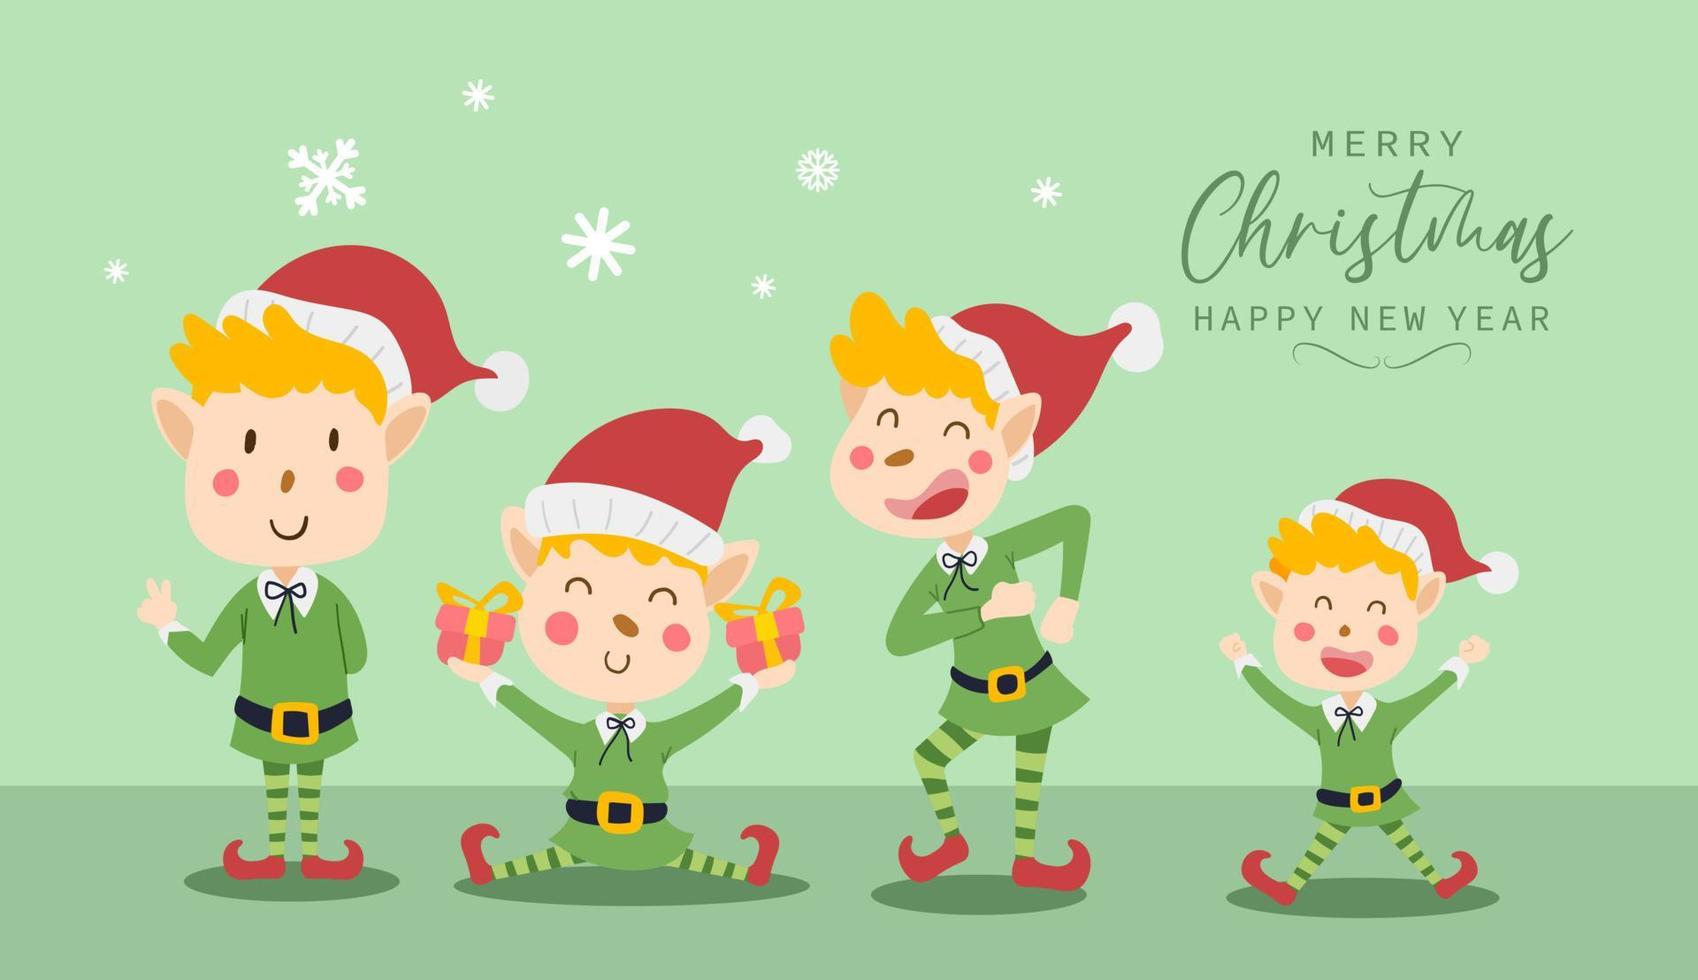 Merry christmas and happy new year greeting card with cute Elf boy costume funny and happy character design in flat style. Vector illustration